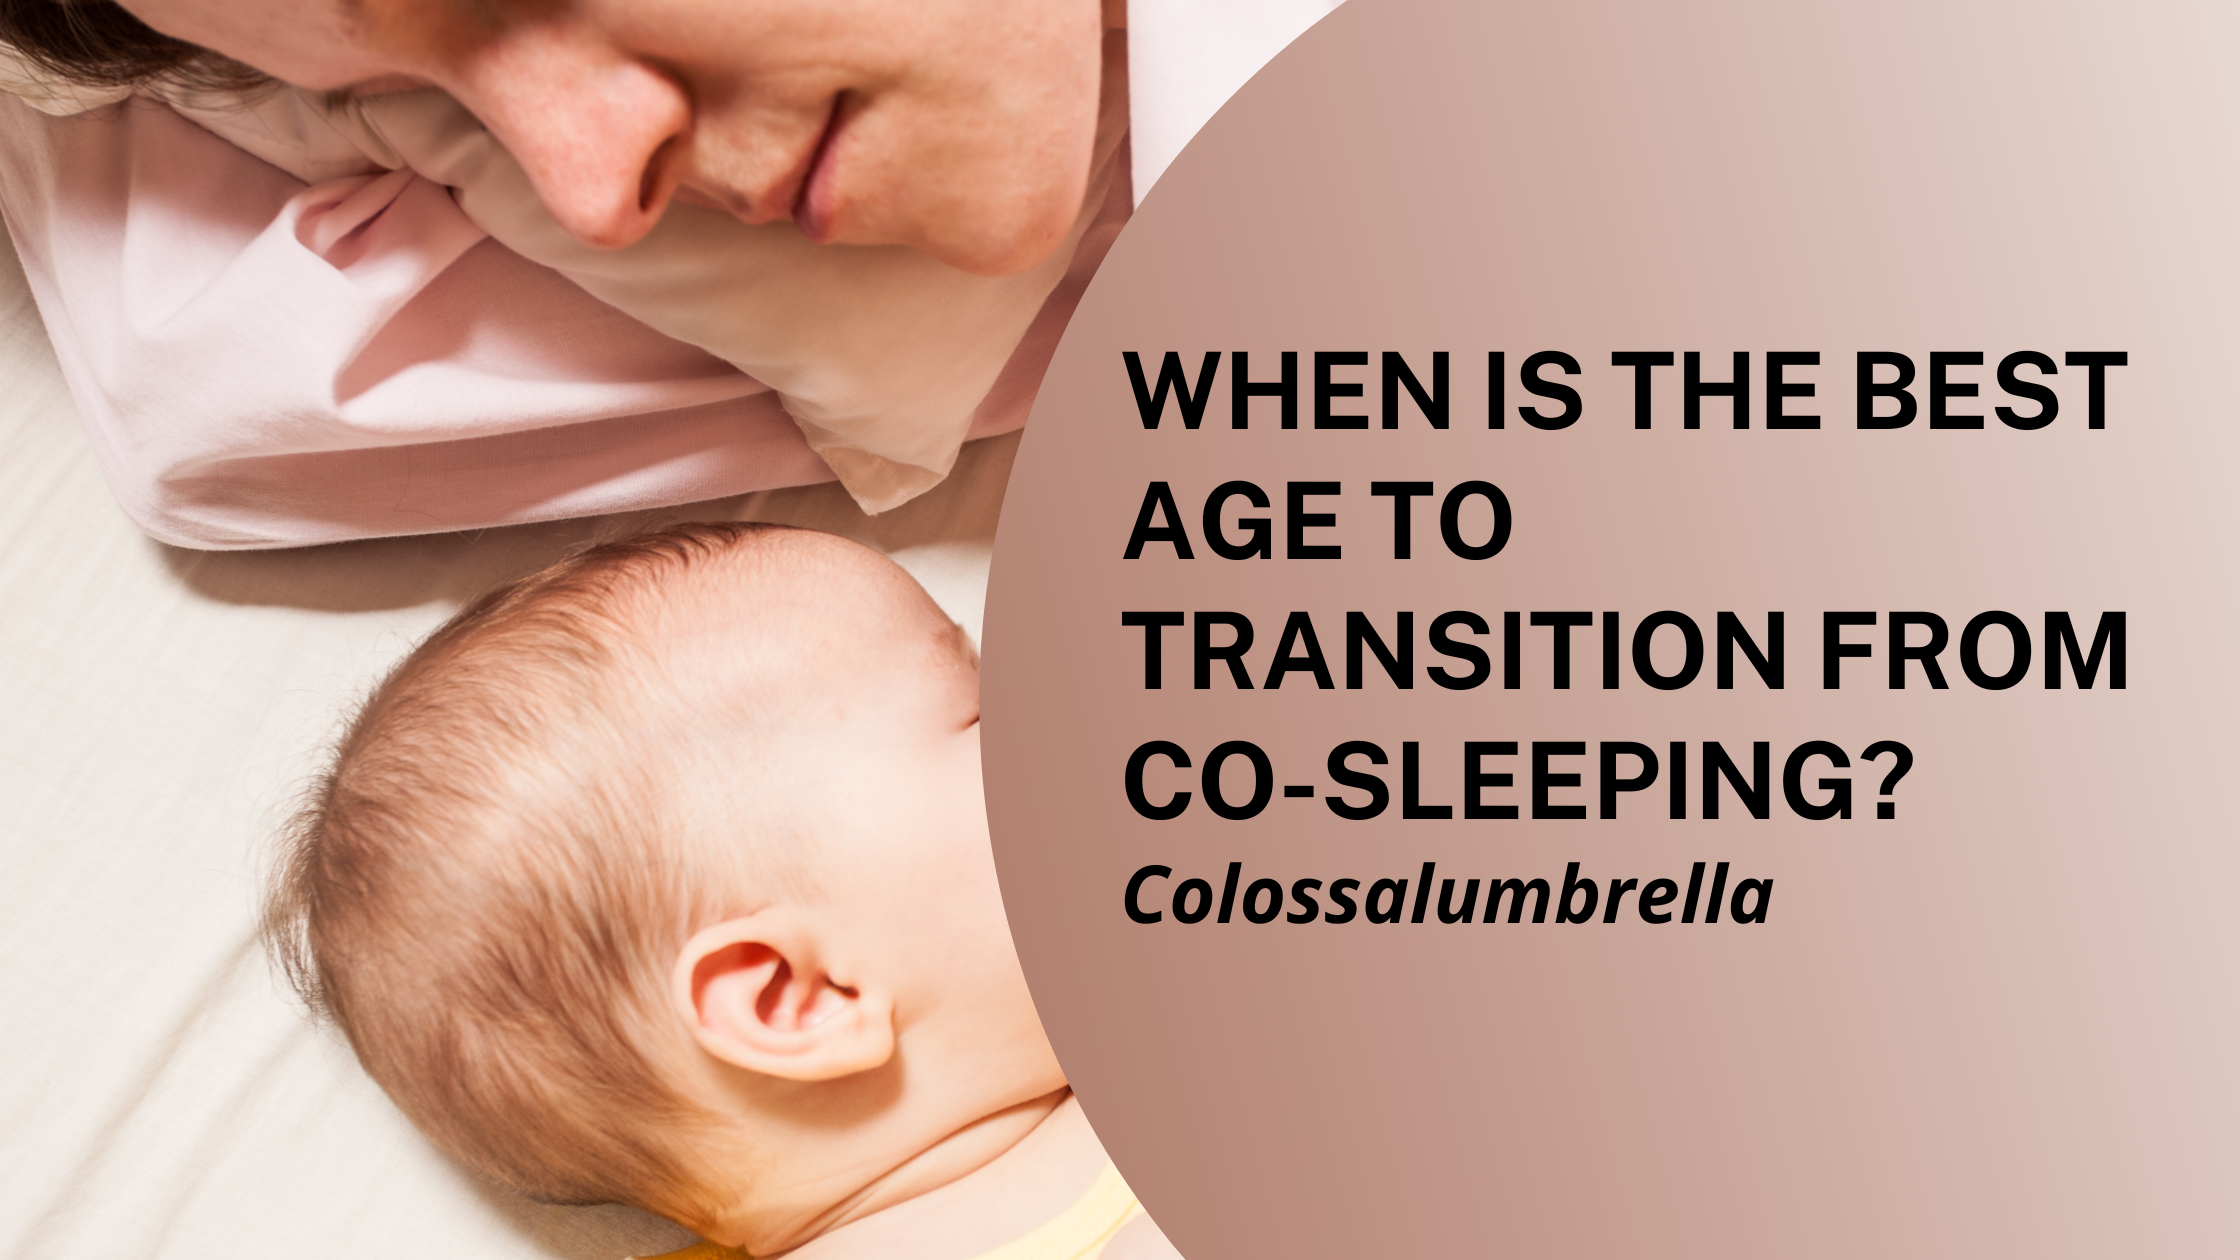 When is the best age to transition from co-sleeping?